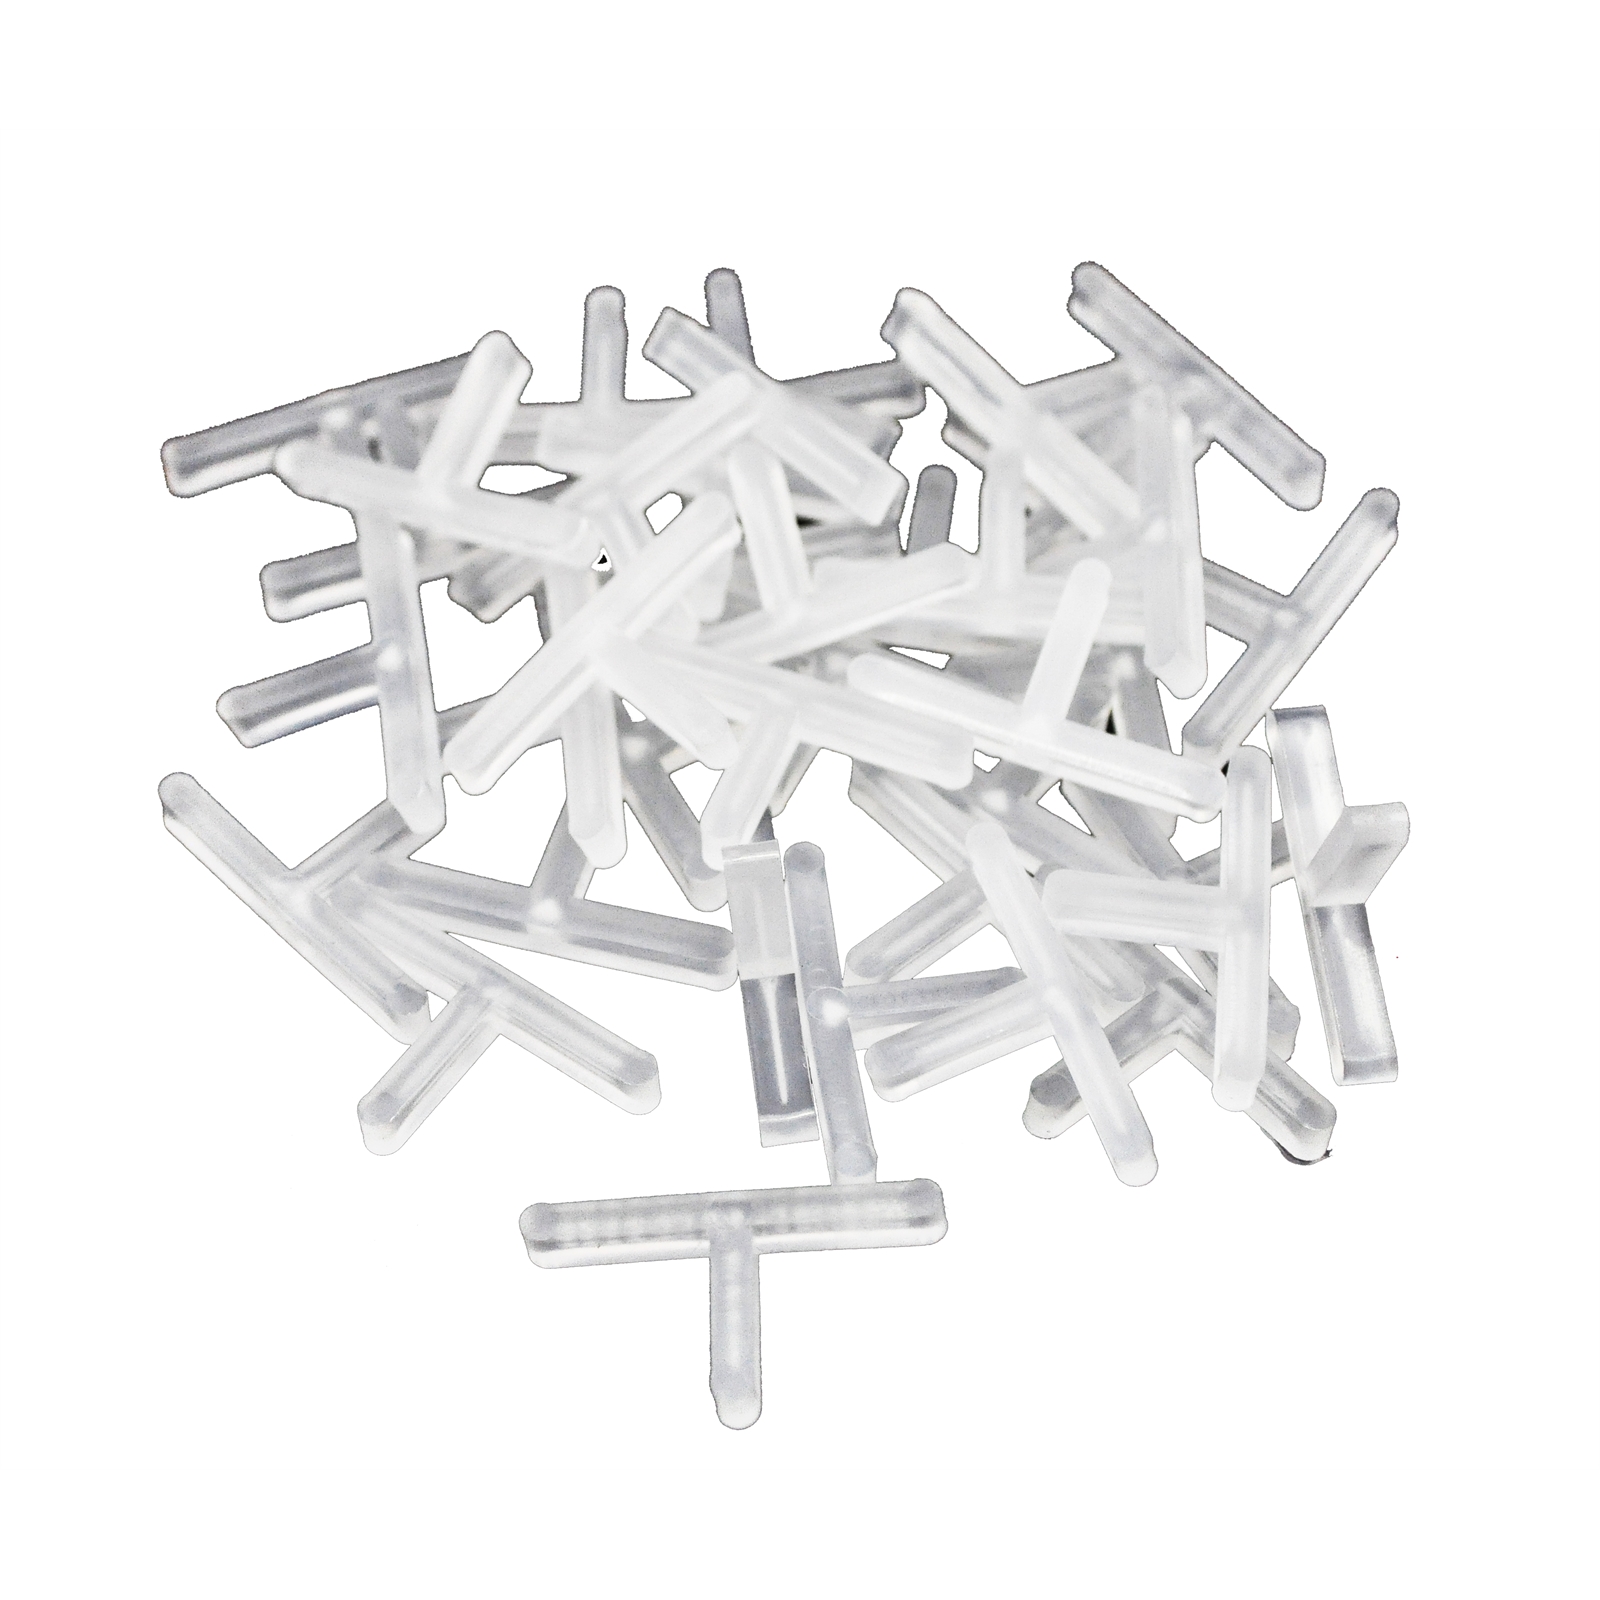 QEP 3mm T Shape Spacers - 500 Pack